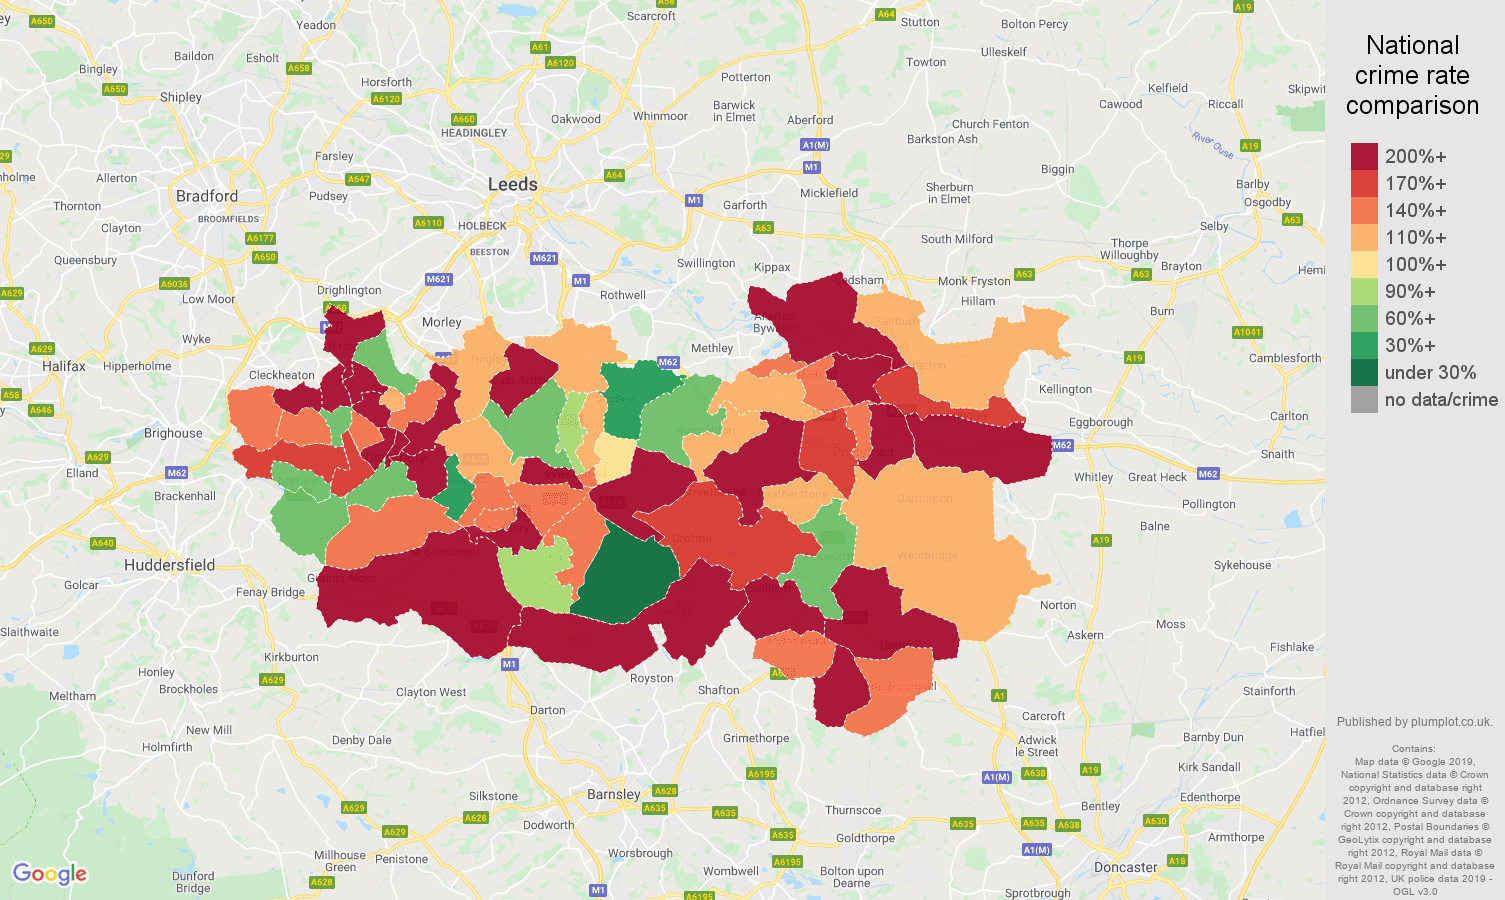 Wakefield other crime rate comparison map